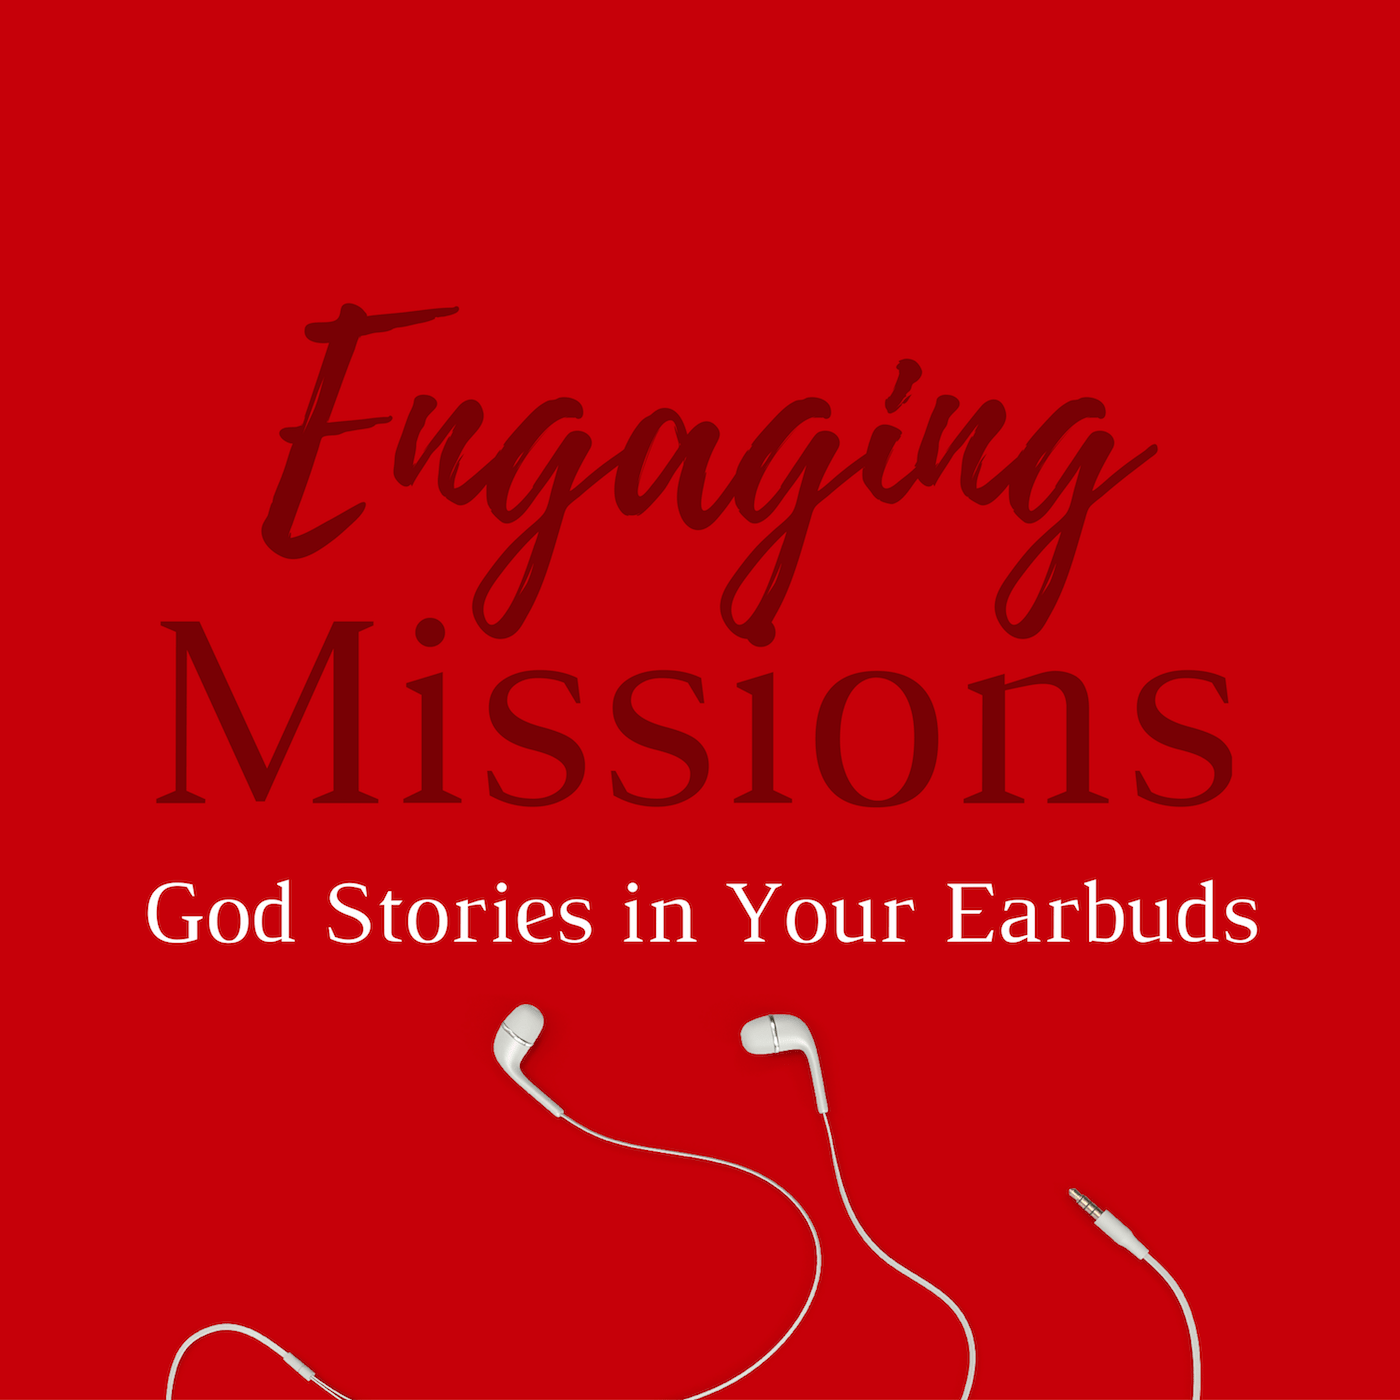 Artwork for podcast Engaging Missions